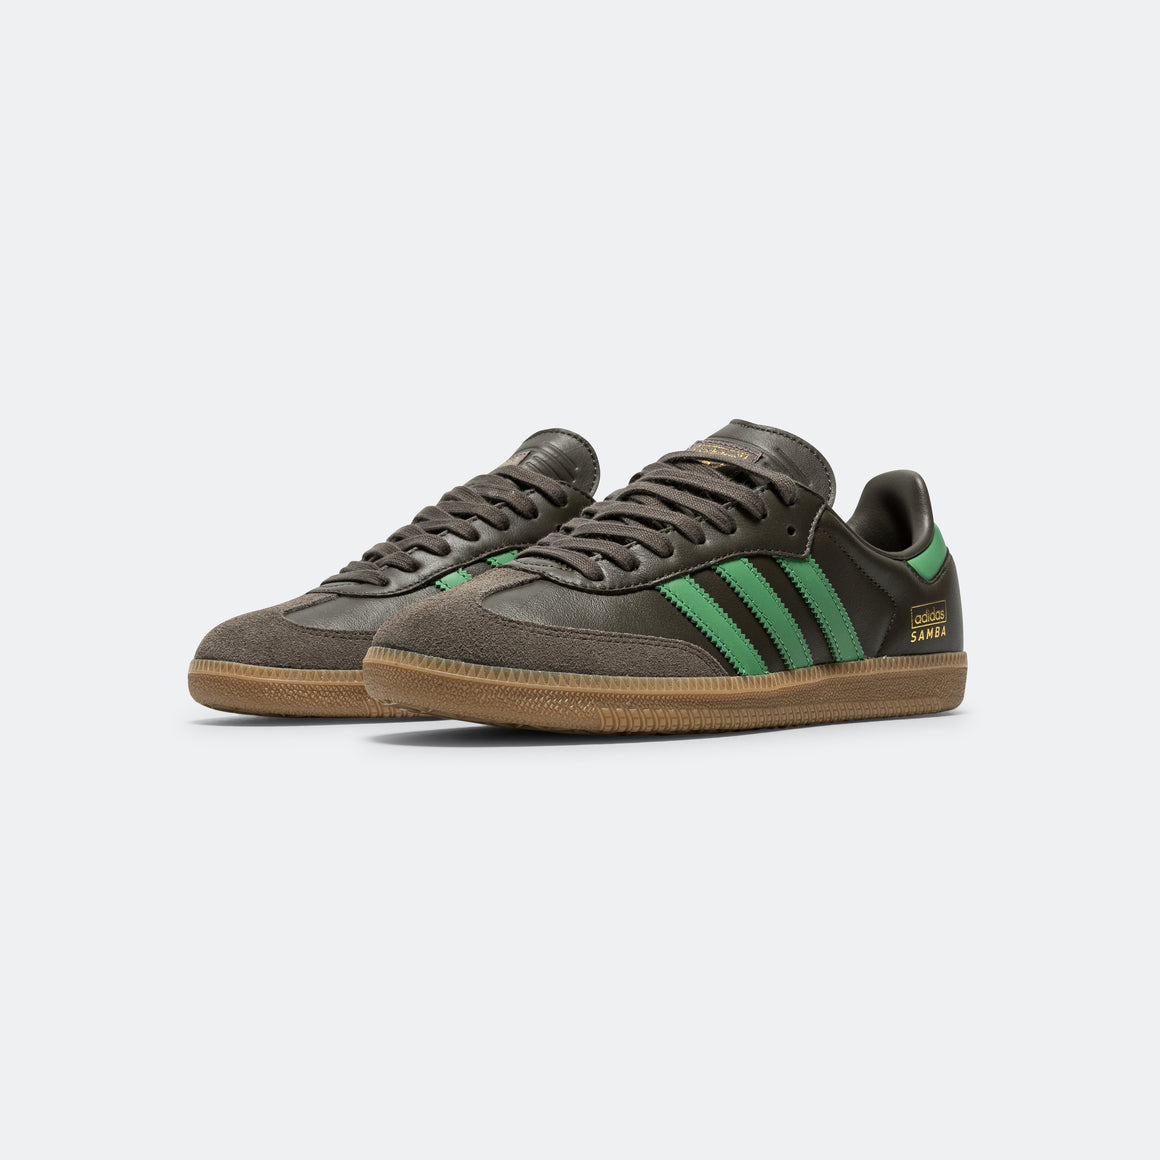 adidas - Samba OG - Shadow Olive/Preloved Green-Gum - UP THERE